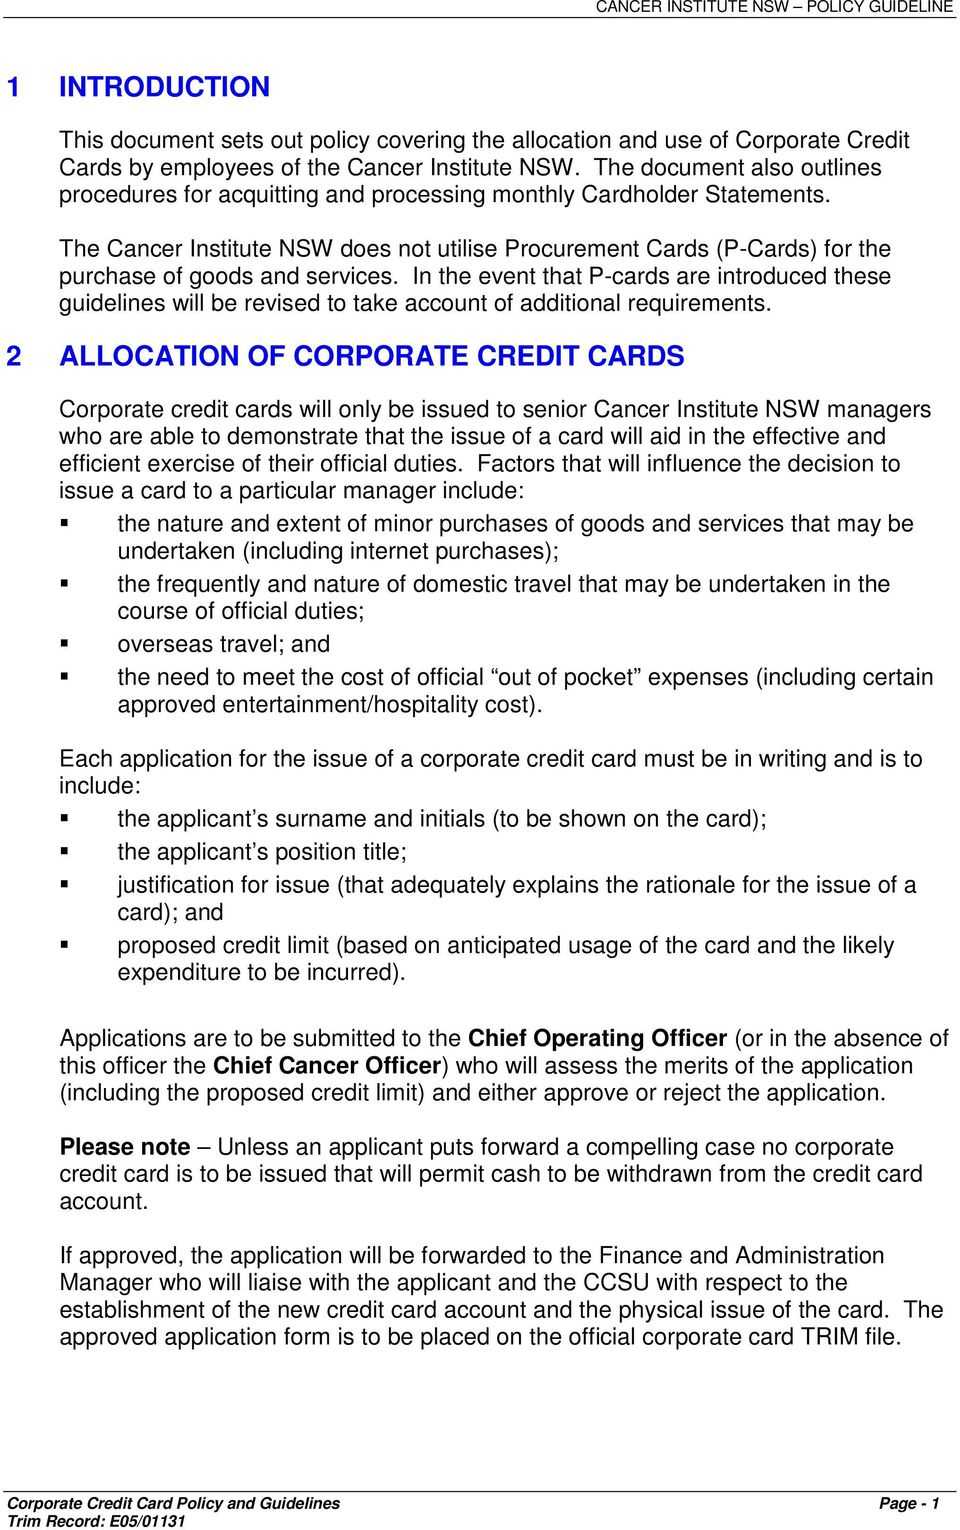 Corporate Credit Card Policy Template ] – Procurement Cards For Company Credit Card Policy Template